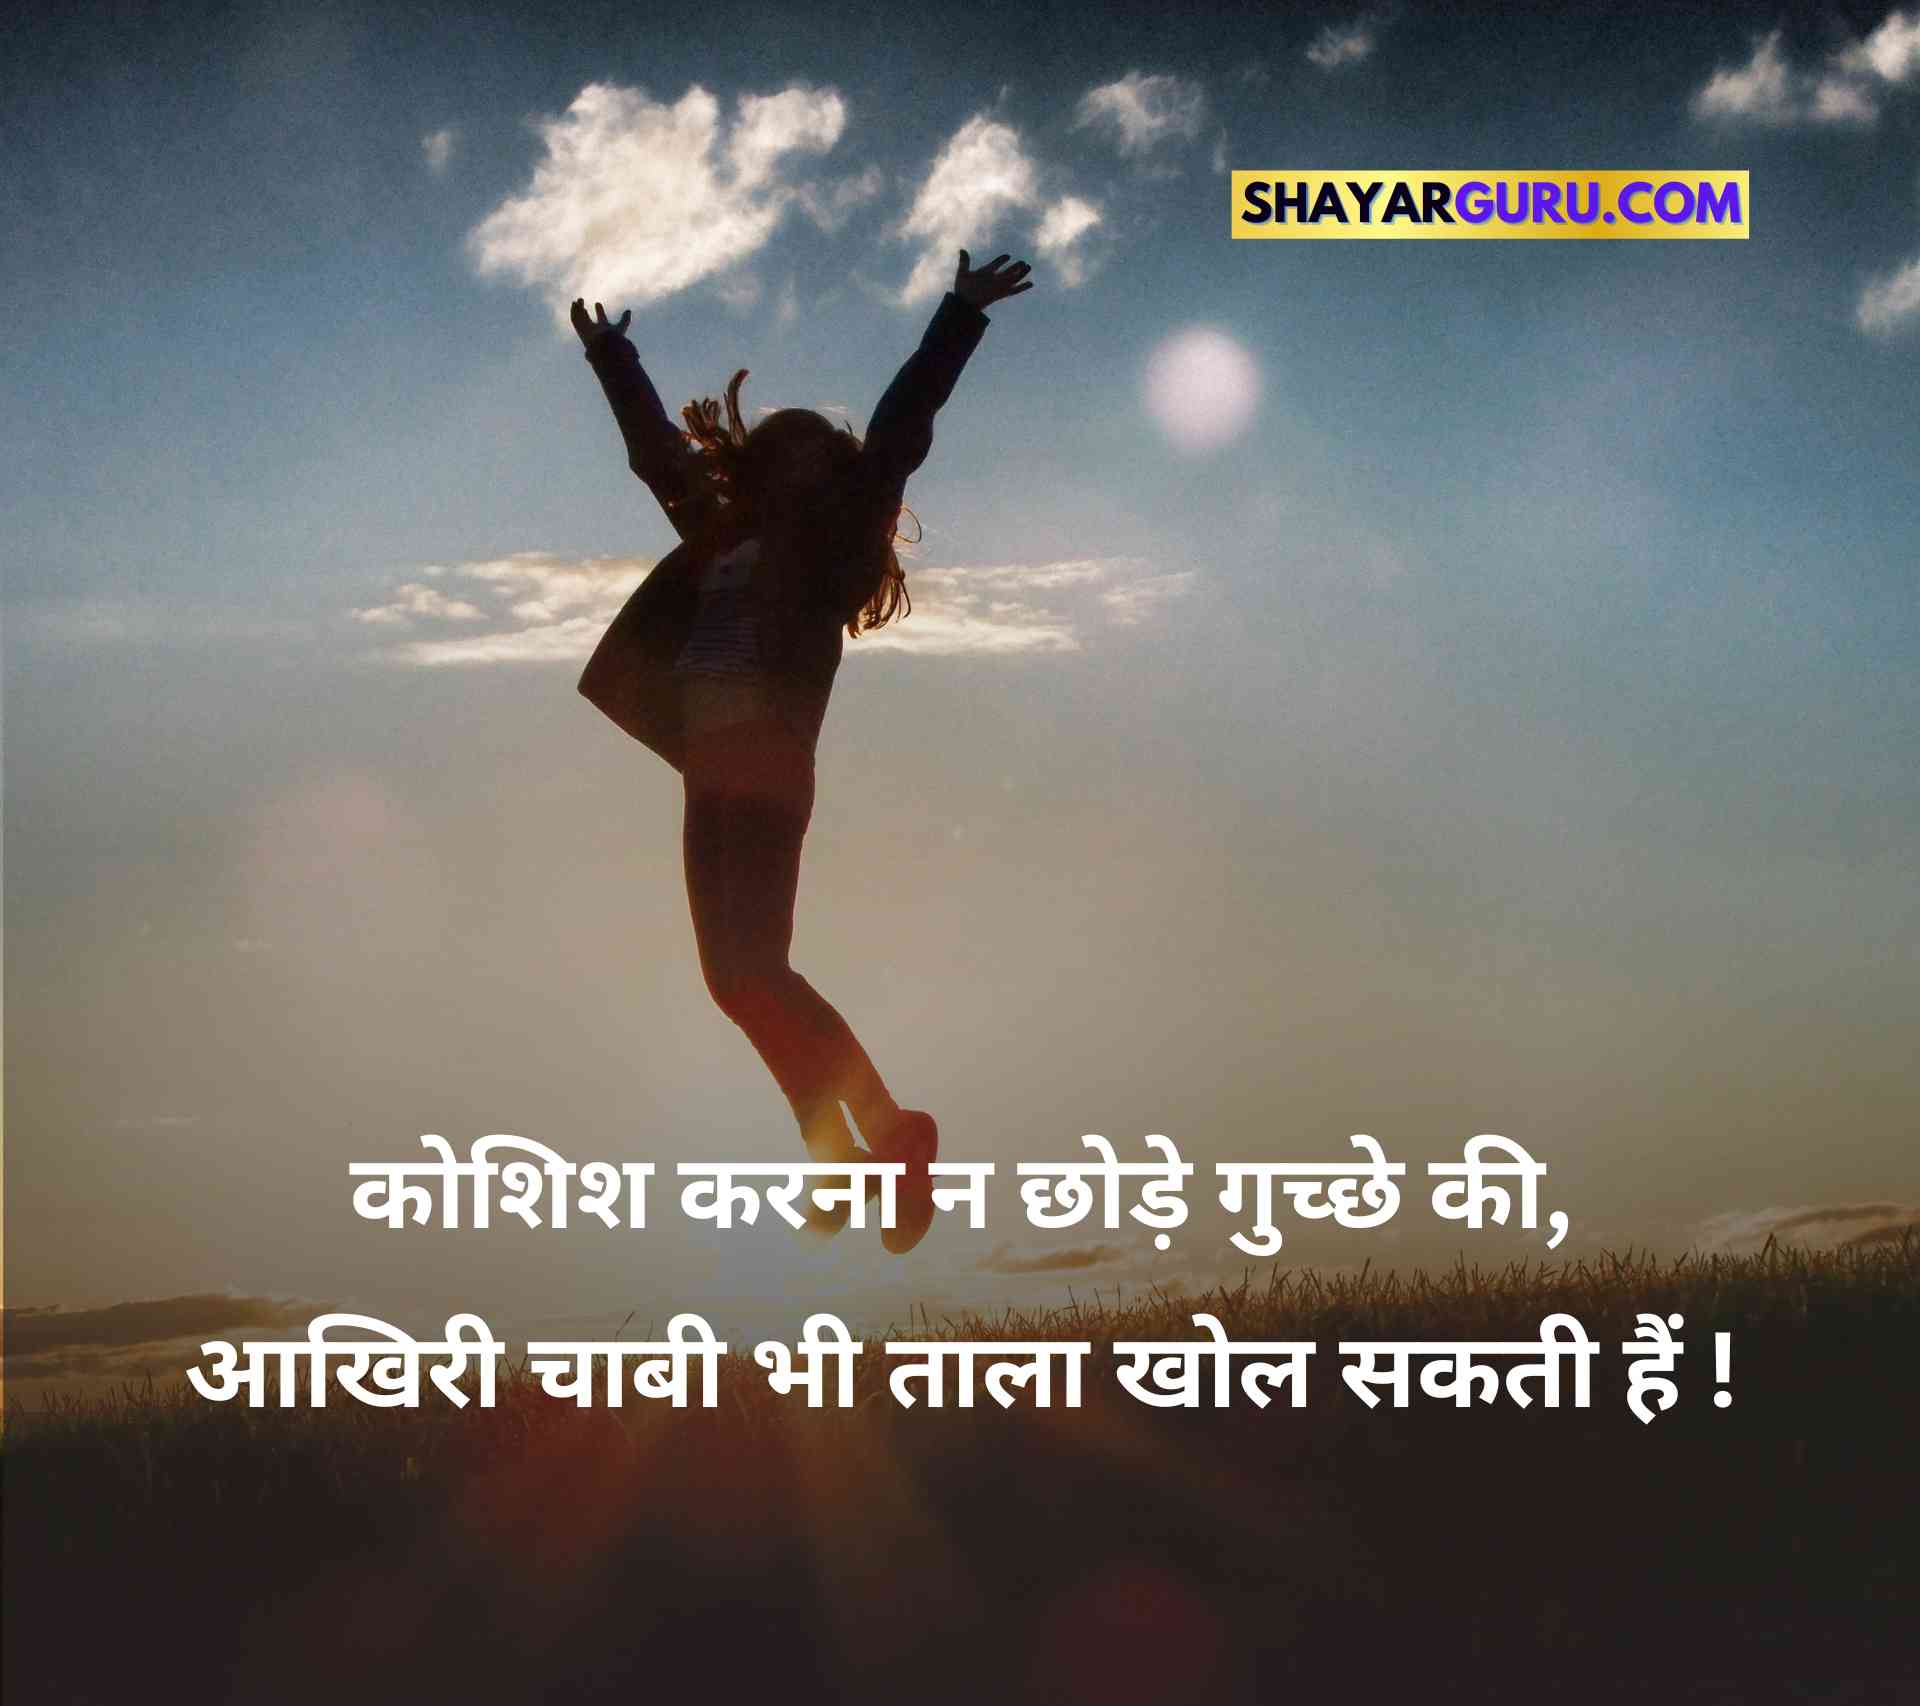 Motivational Quotes in Hindi Image